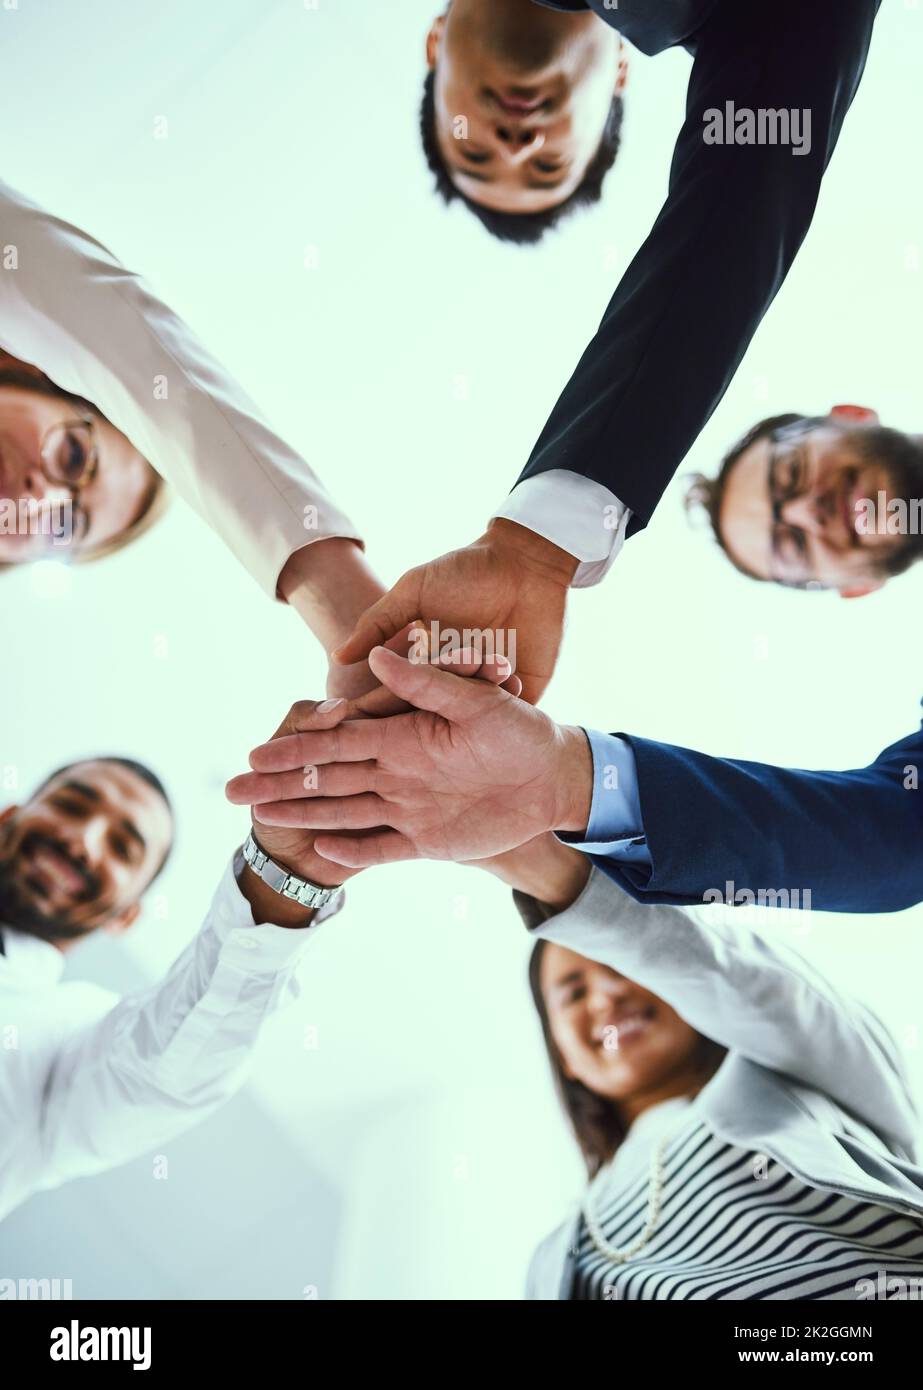 Staying motivated in their quest for success. Low angle shot of a diverse group of businesspeople joining their hands together in unity. Stock Photo